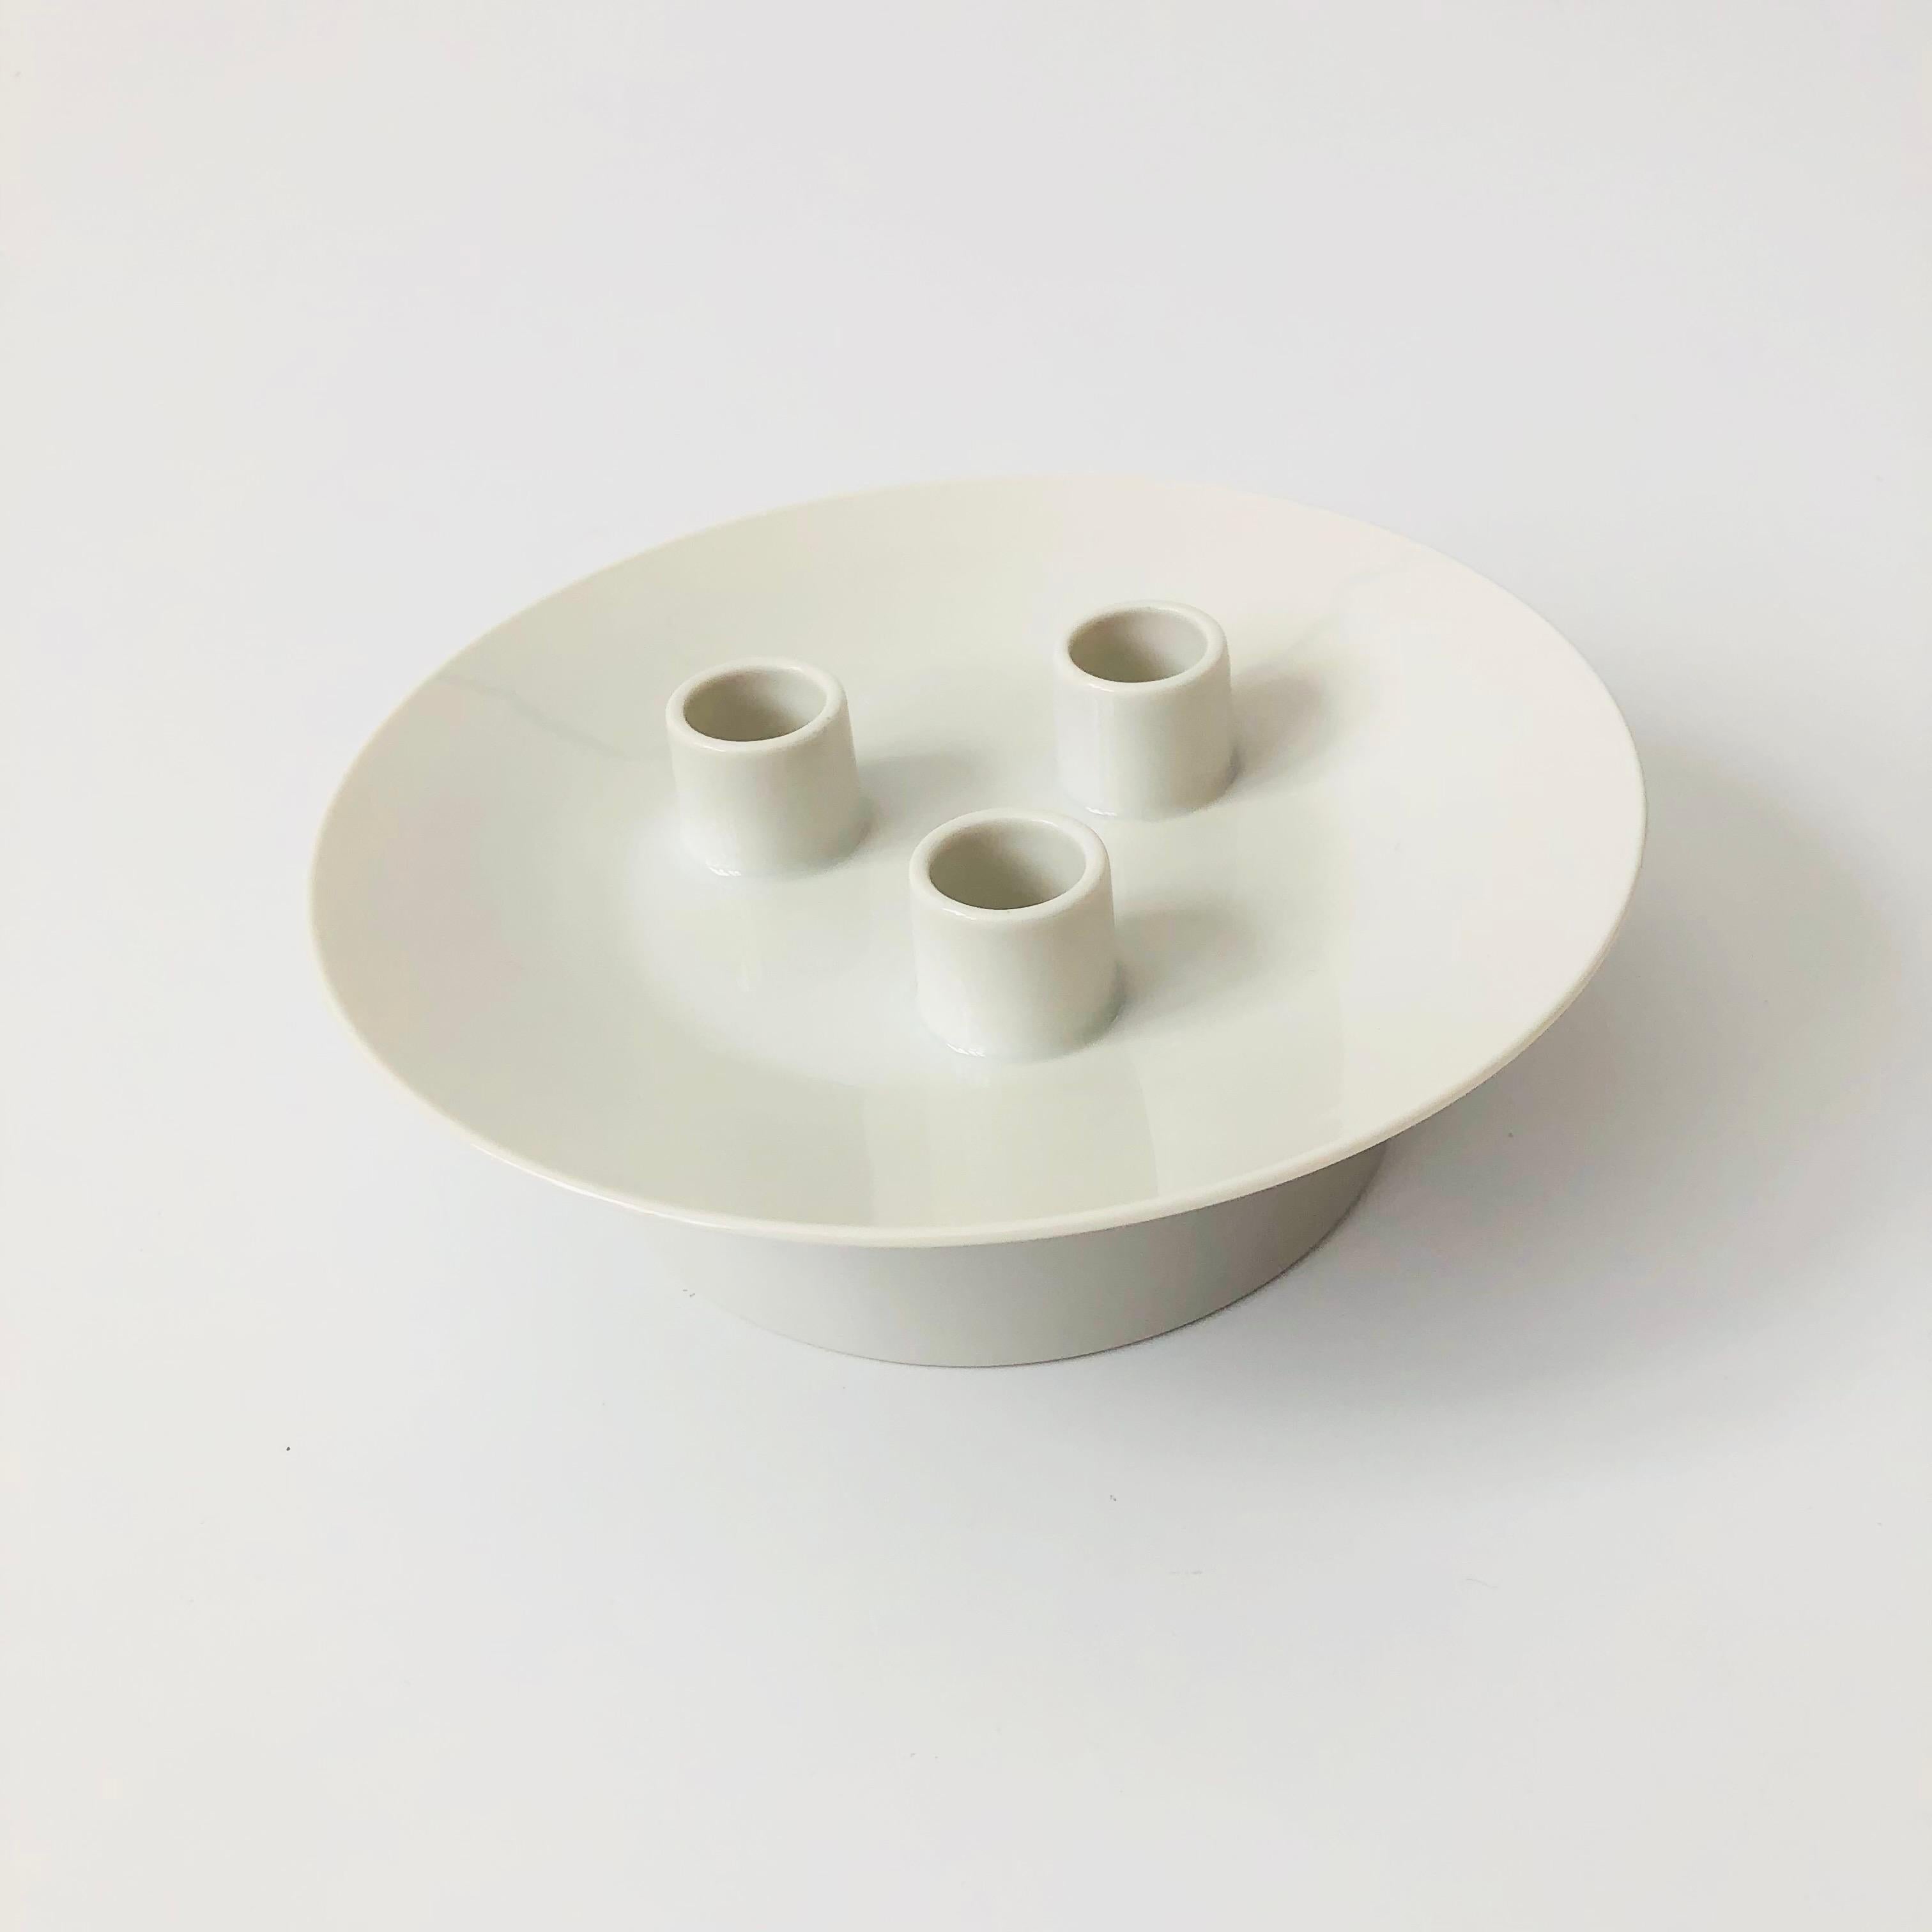 A mid century porcelain triple candle holder from the 